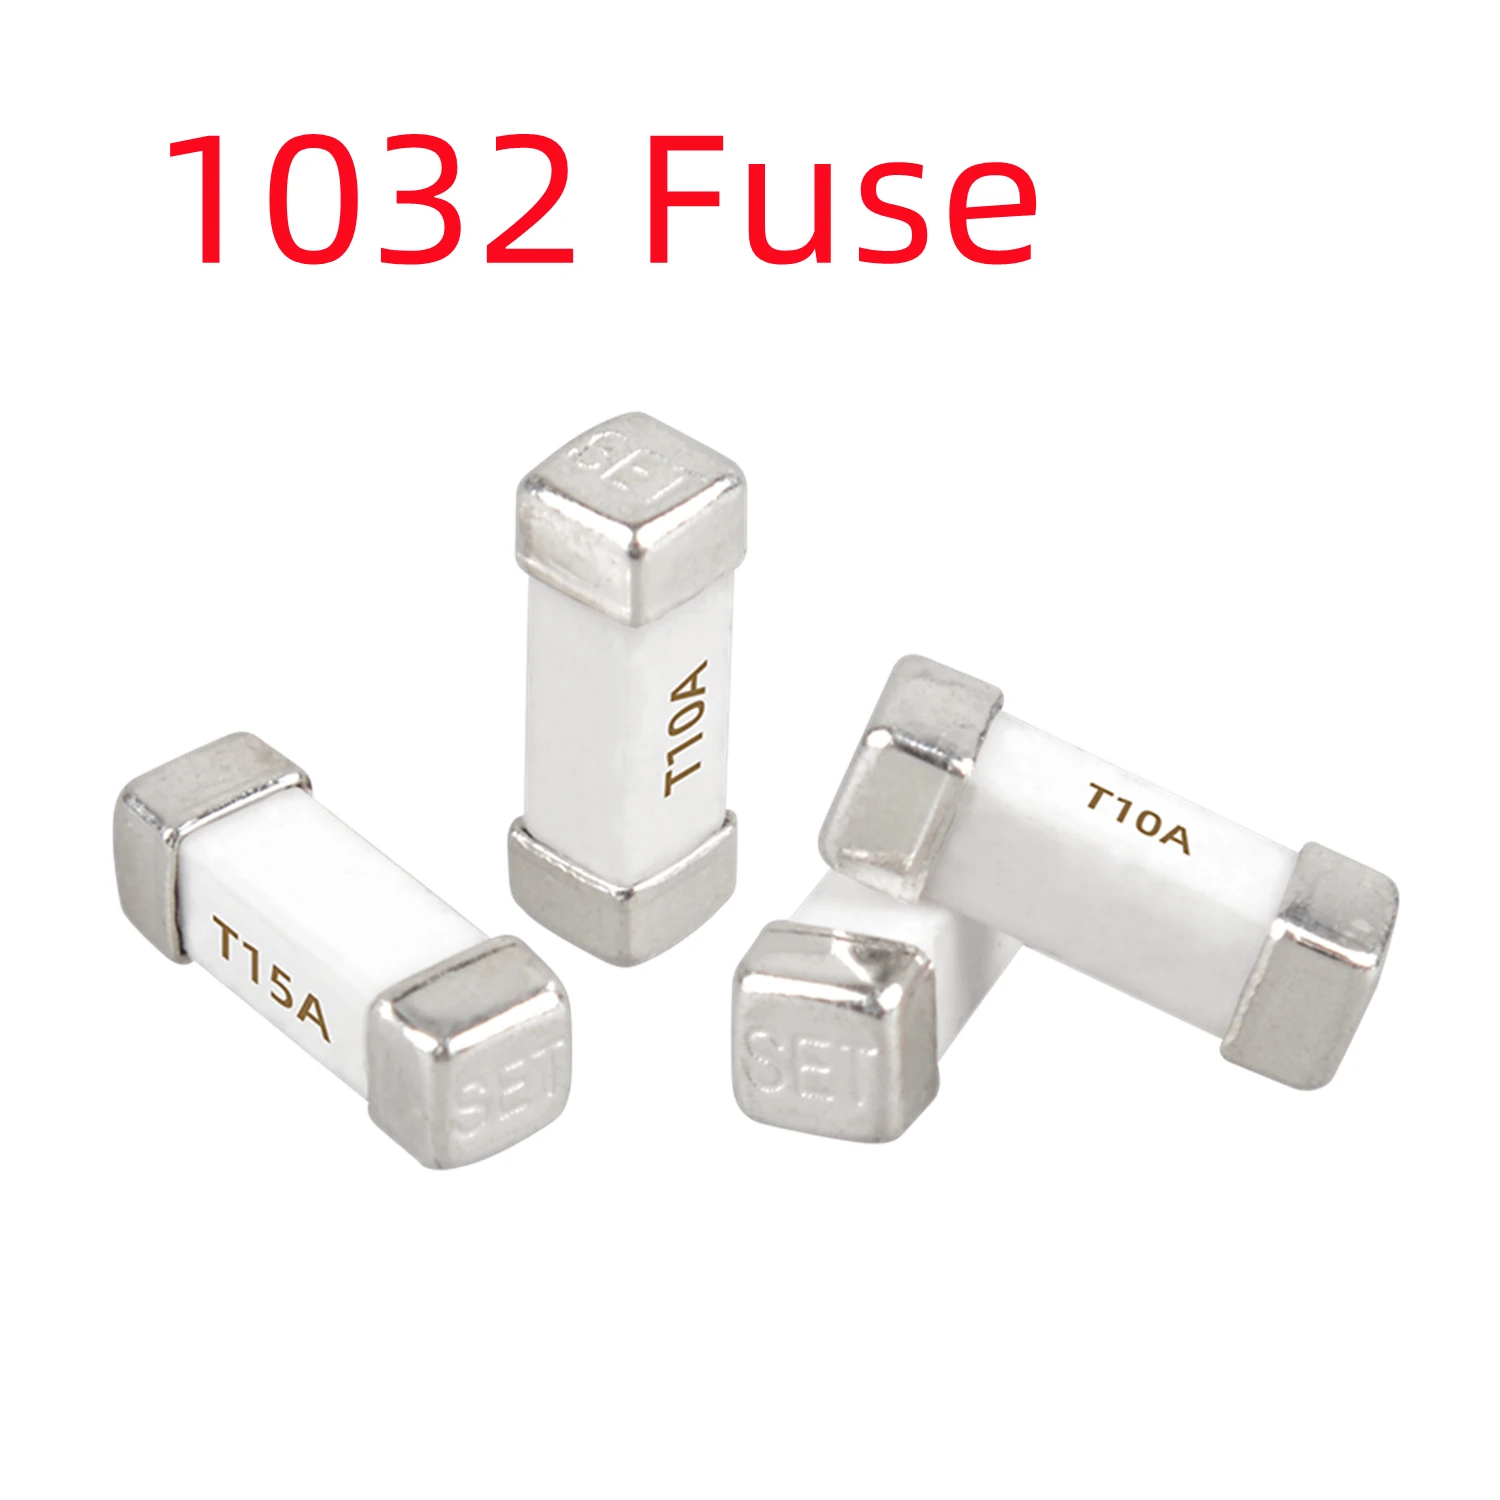 Gold Silver 1032 Fuse 250V AC SMD One-Time Fuse 0.5A 500mA 1A 2A 3A 4A 5A 6.3A 8A 10A 12A 15A 630MA Ceramic Surface Mount Fuse